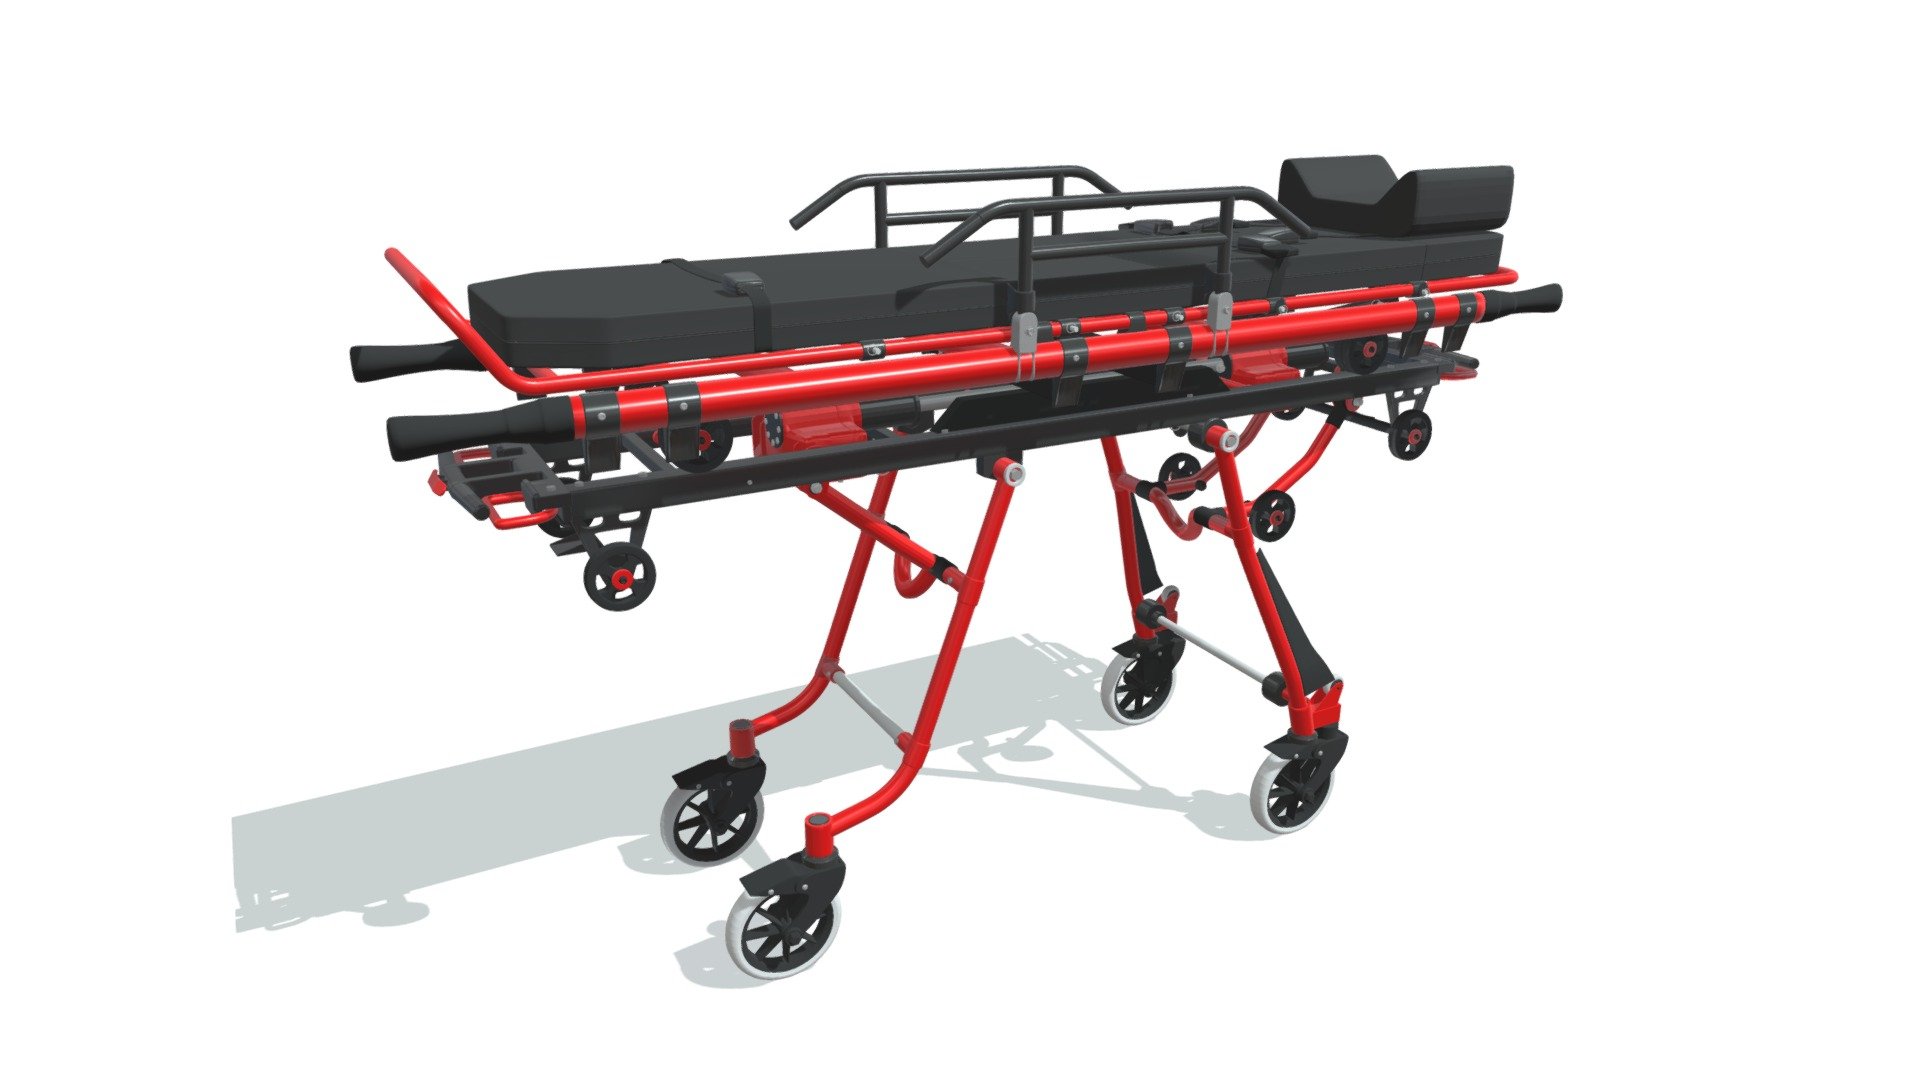 High quality 3d model of ambulance stretcher trolley.
Model is high resolution and perfect for close-up detailed renders.
Colors can be easily modified.
Many other 3d medical equipment available in this series, please search our catalog 3d model